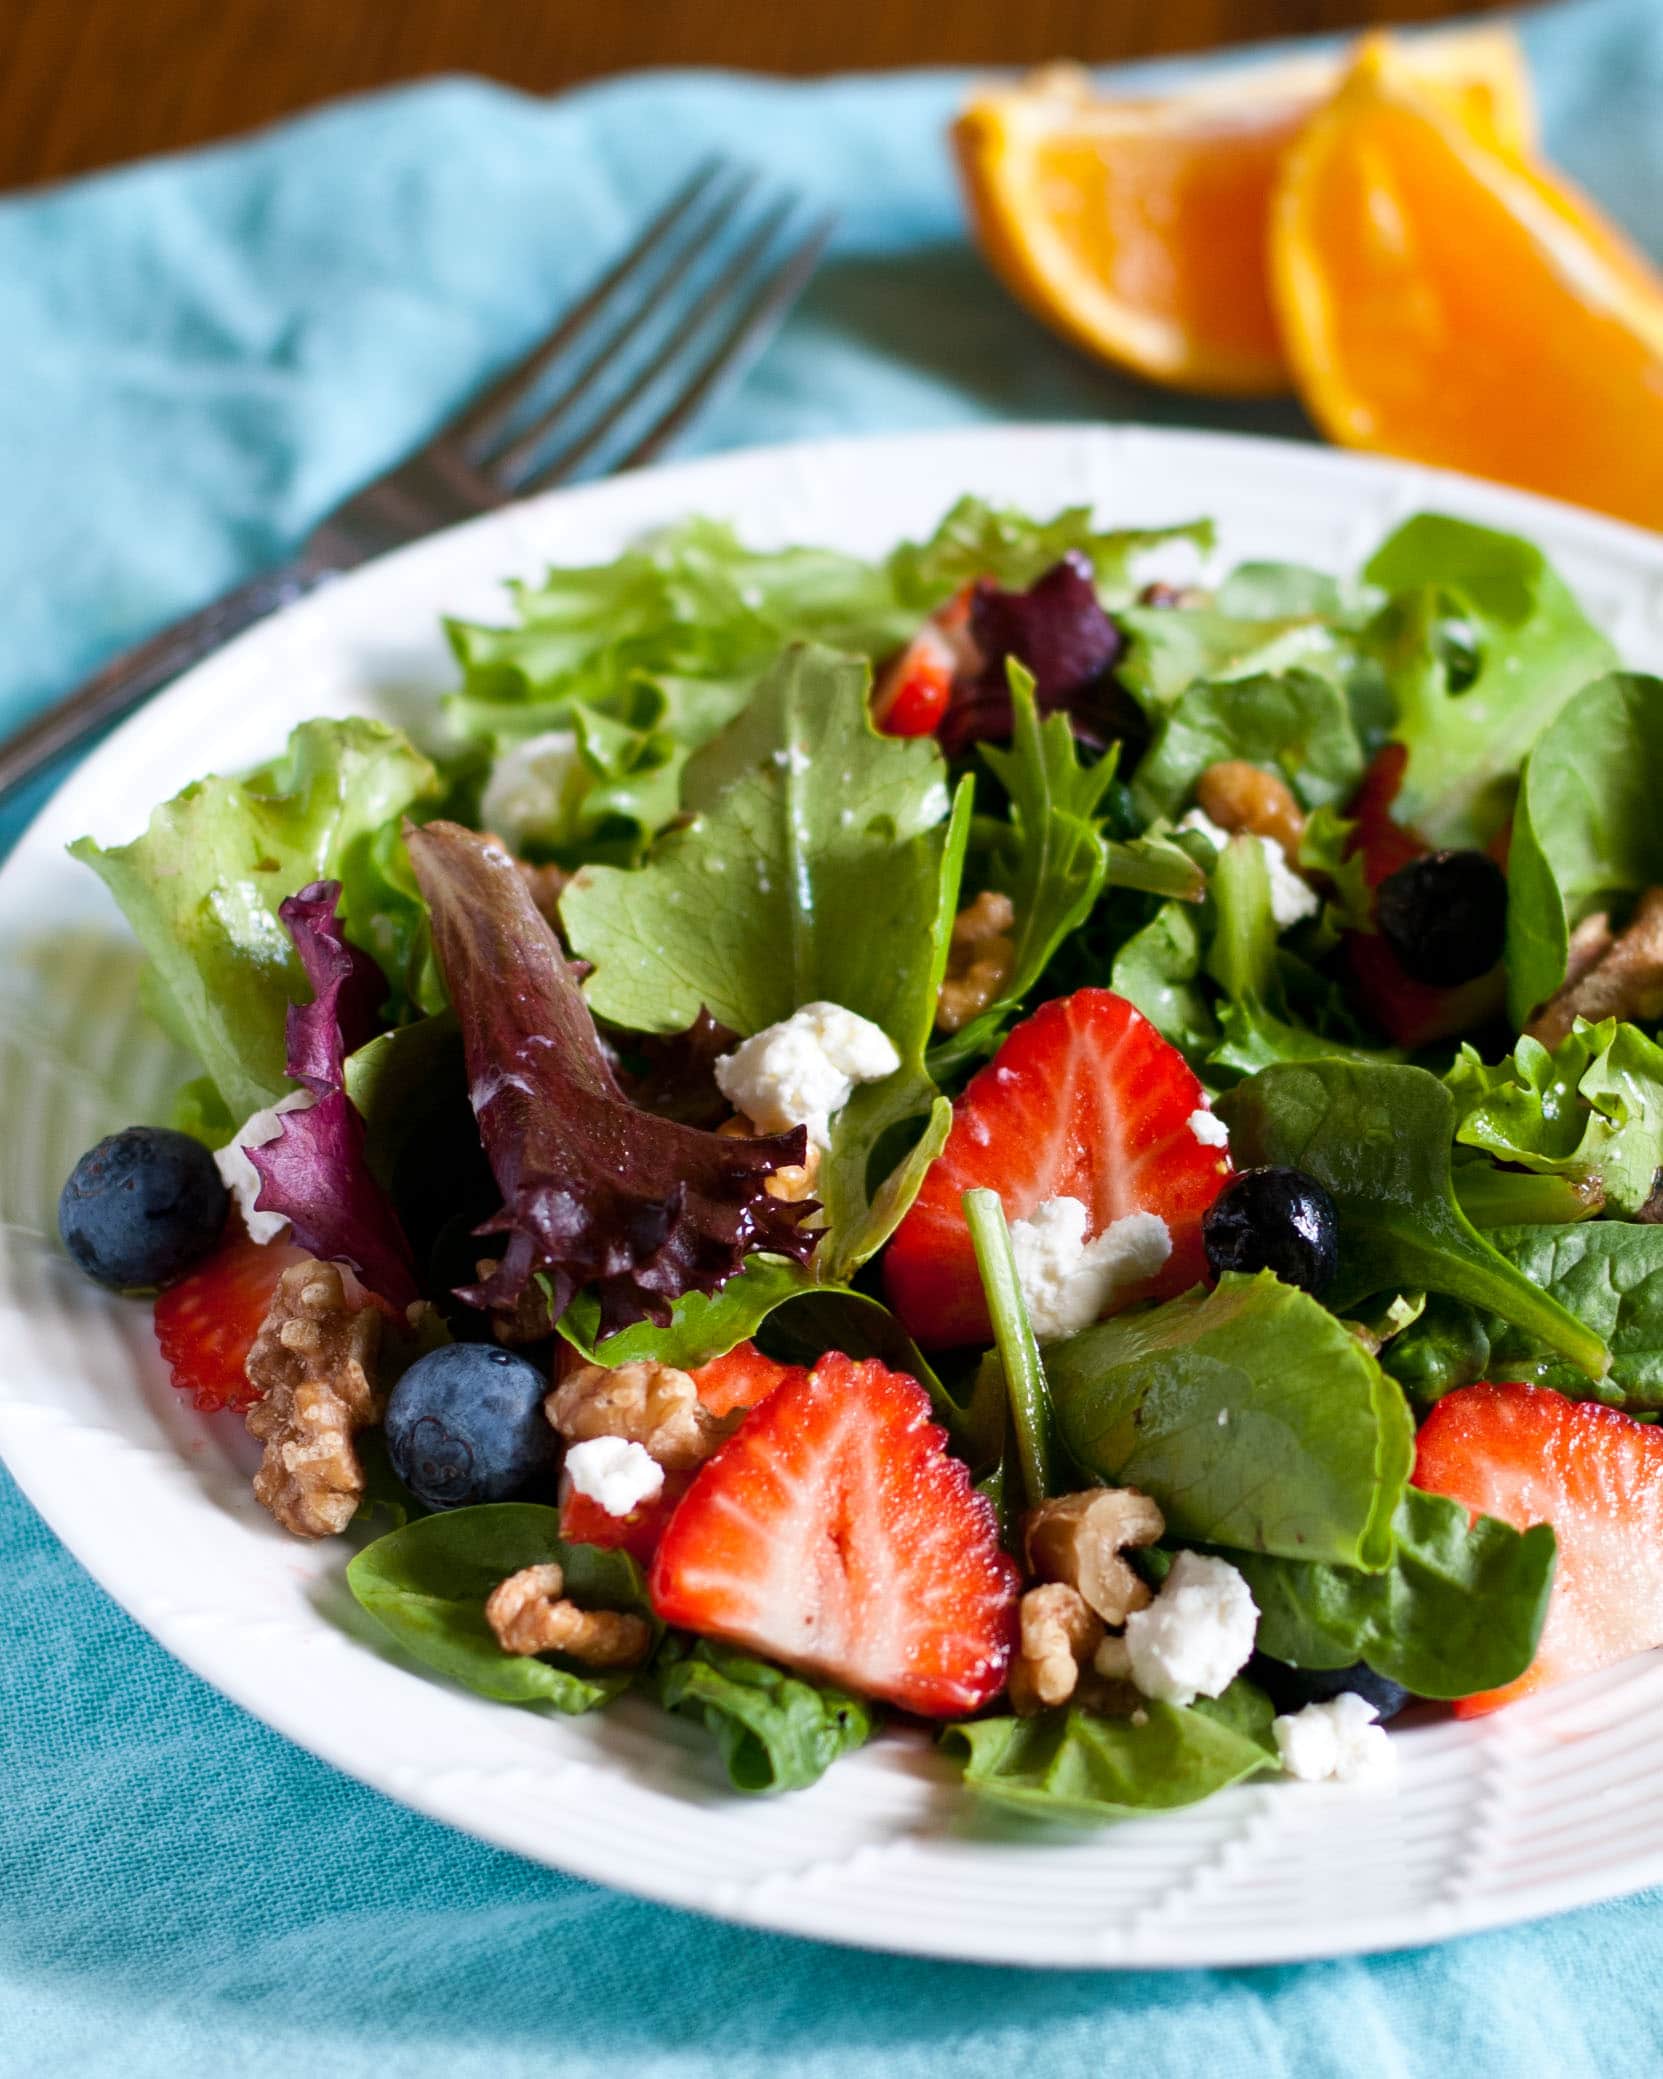 Salad with strawberries, blueberries, goat cheese, and walnuts on a white plate.